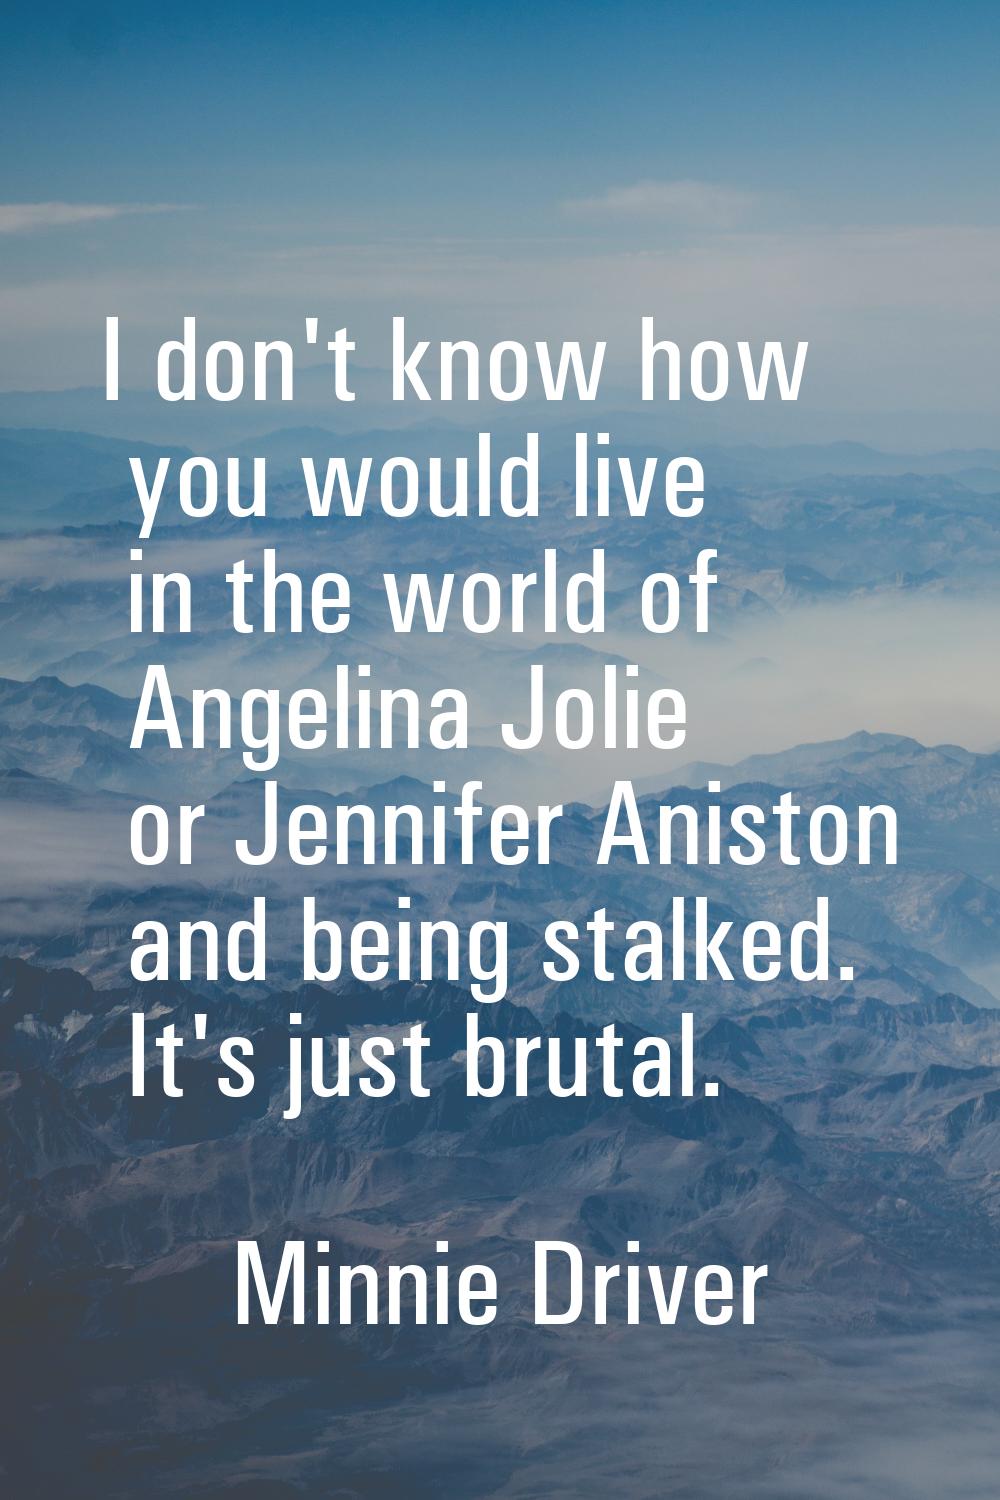 I don't know how you would live in the world of Angelina Jolie or Jennifer Aniston and being stalke